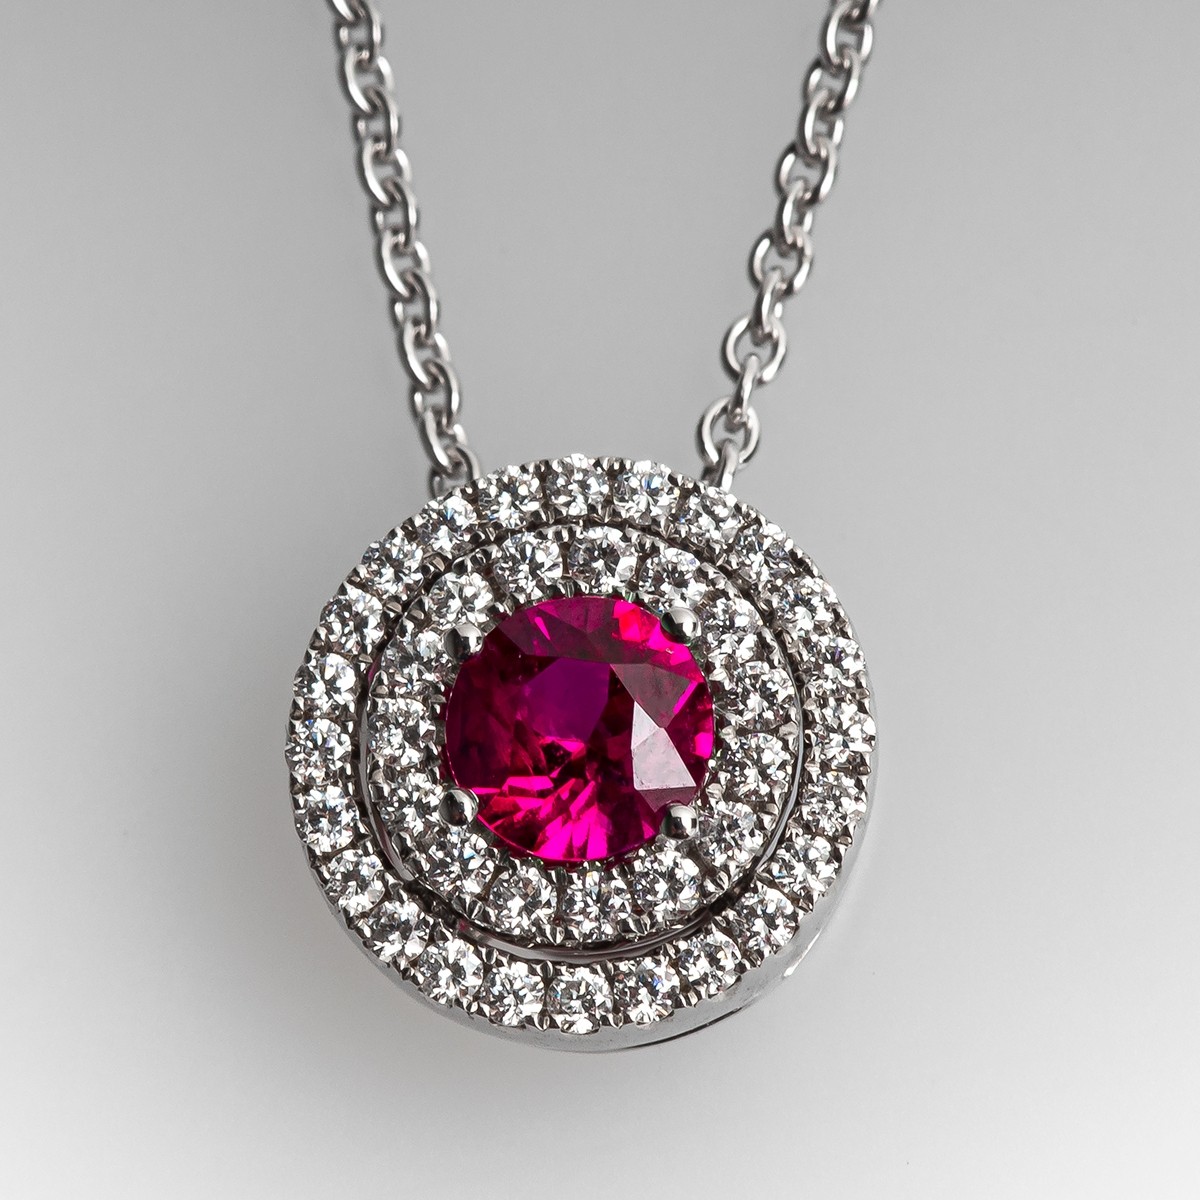 Details about   14kt White Gold Ruby With Halo Diamond Pendant 